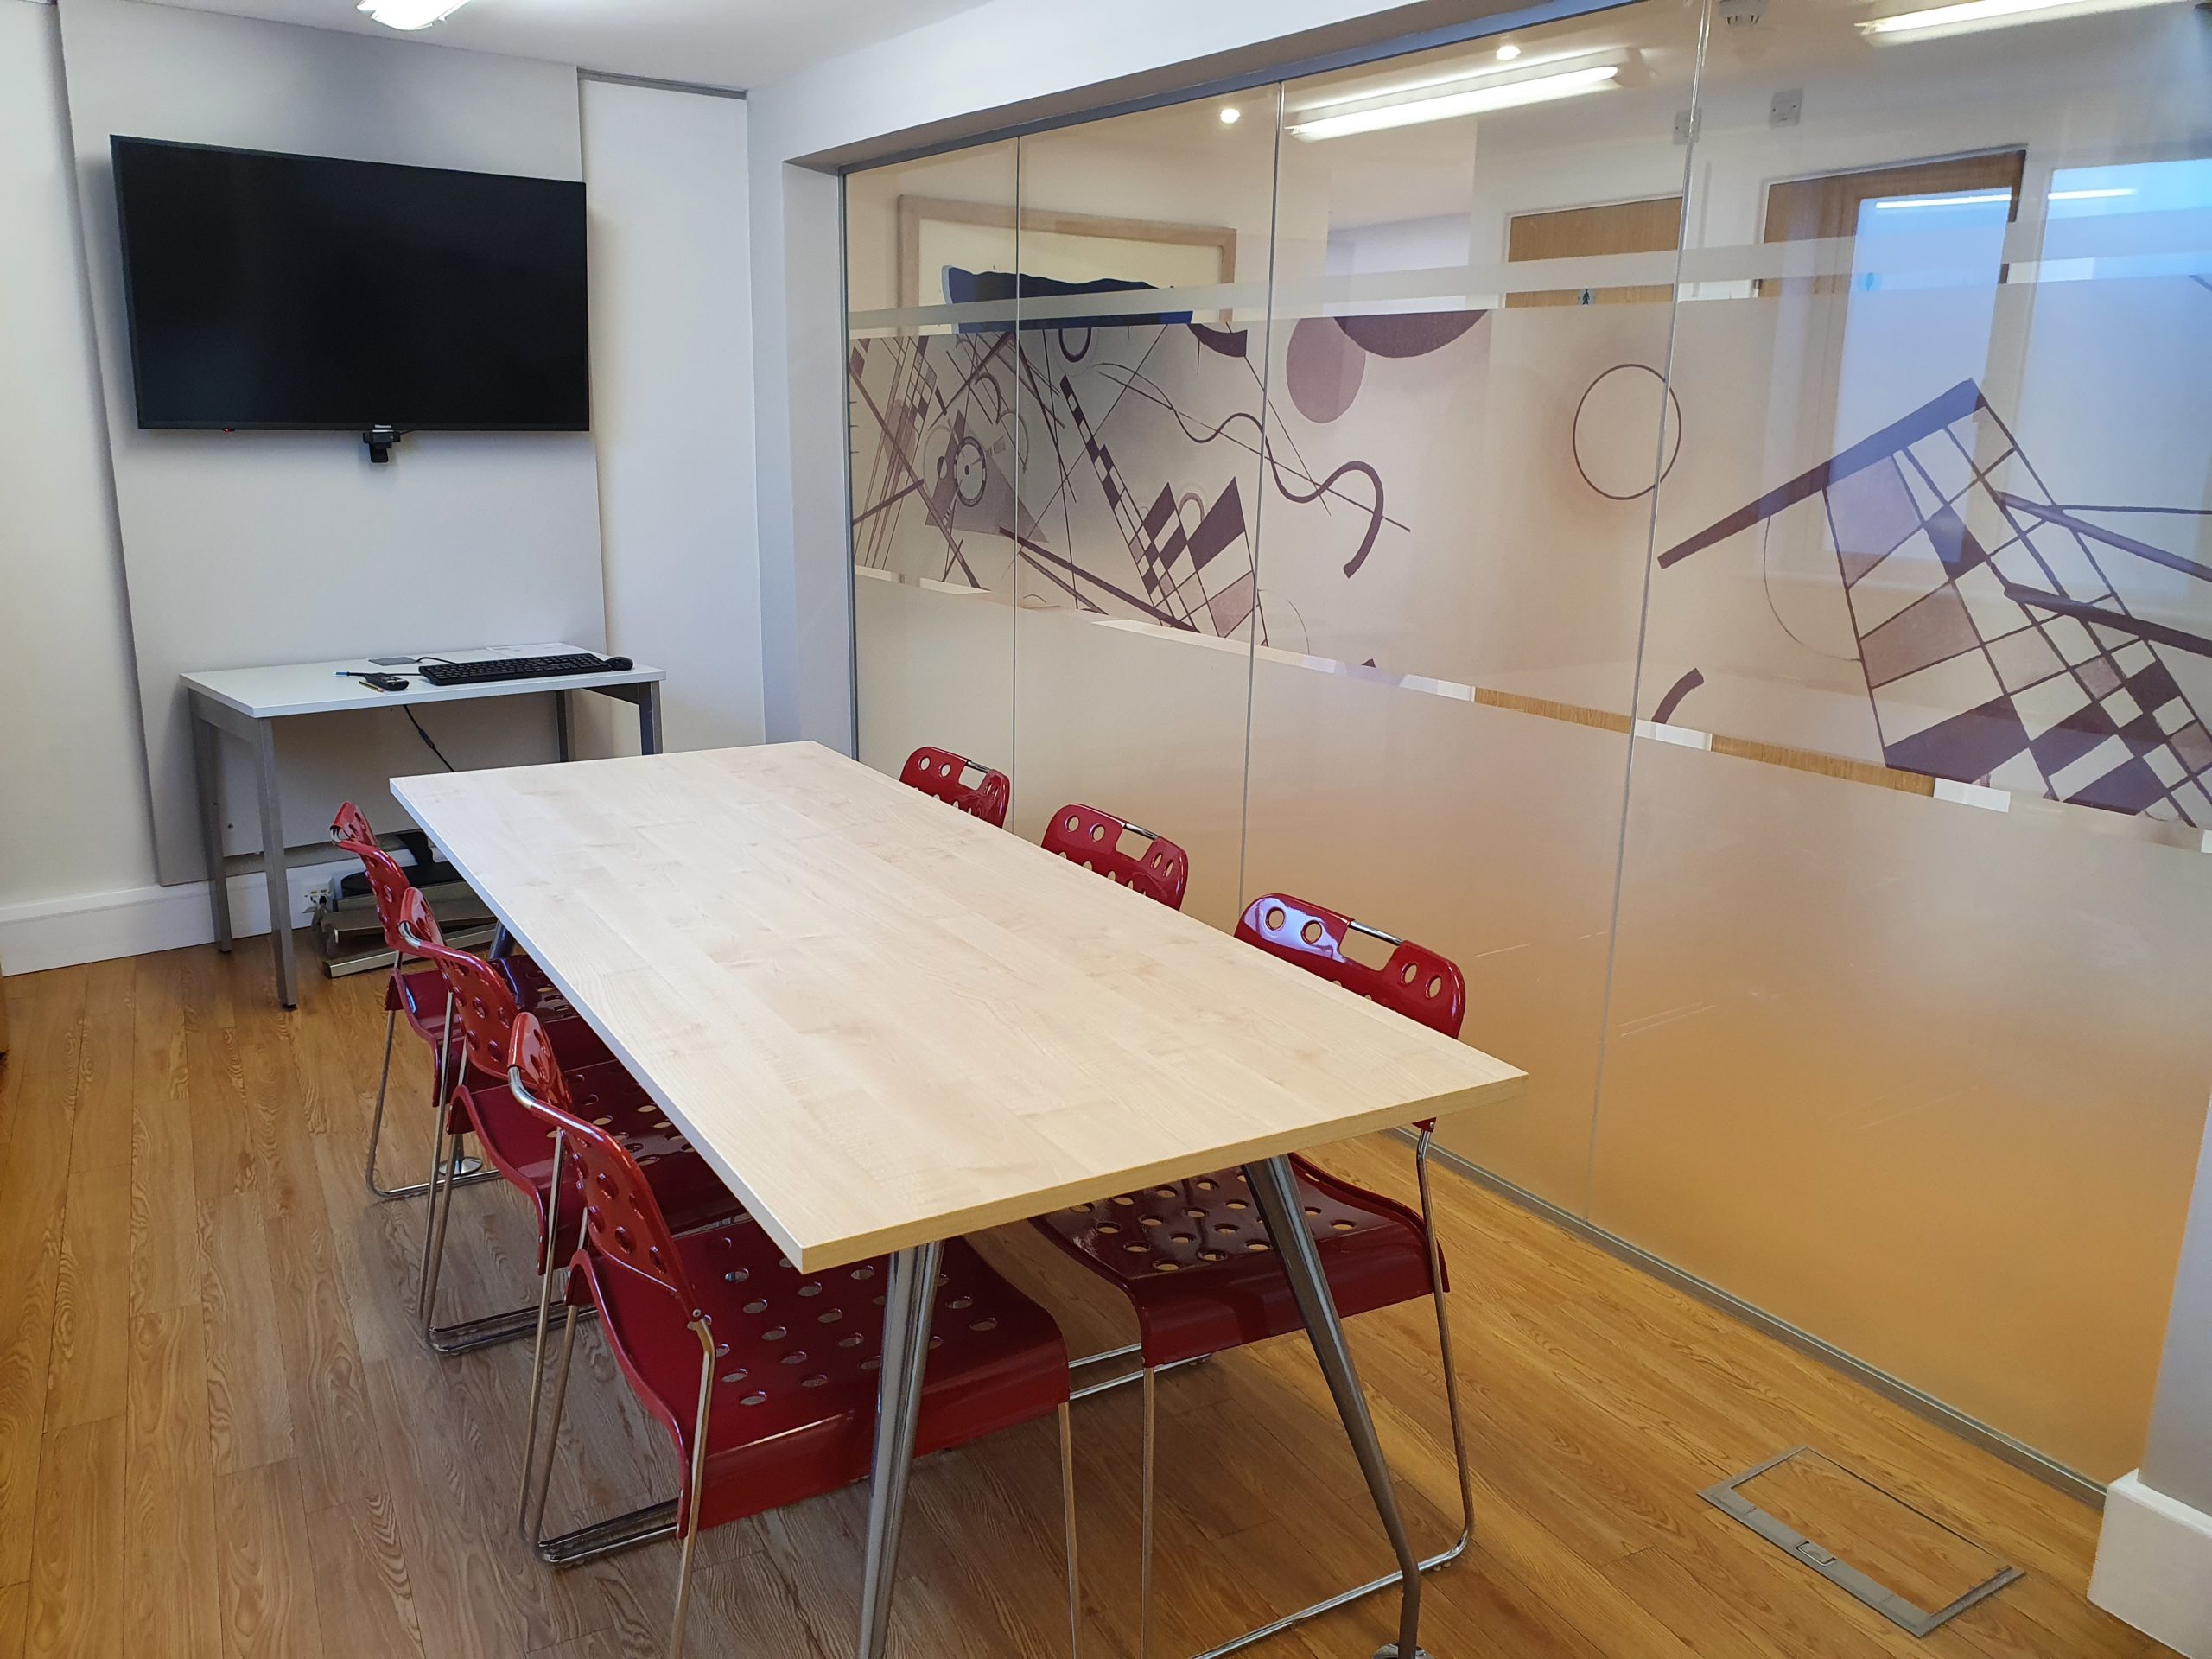 Ground floor meeting room at The Corn Works | Serviced offices in Radlett, Hertfordshire